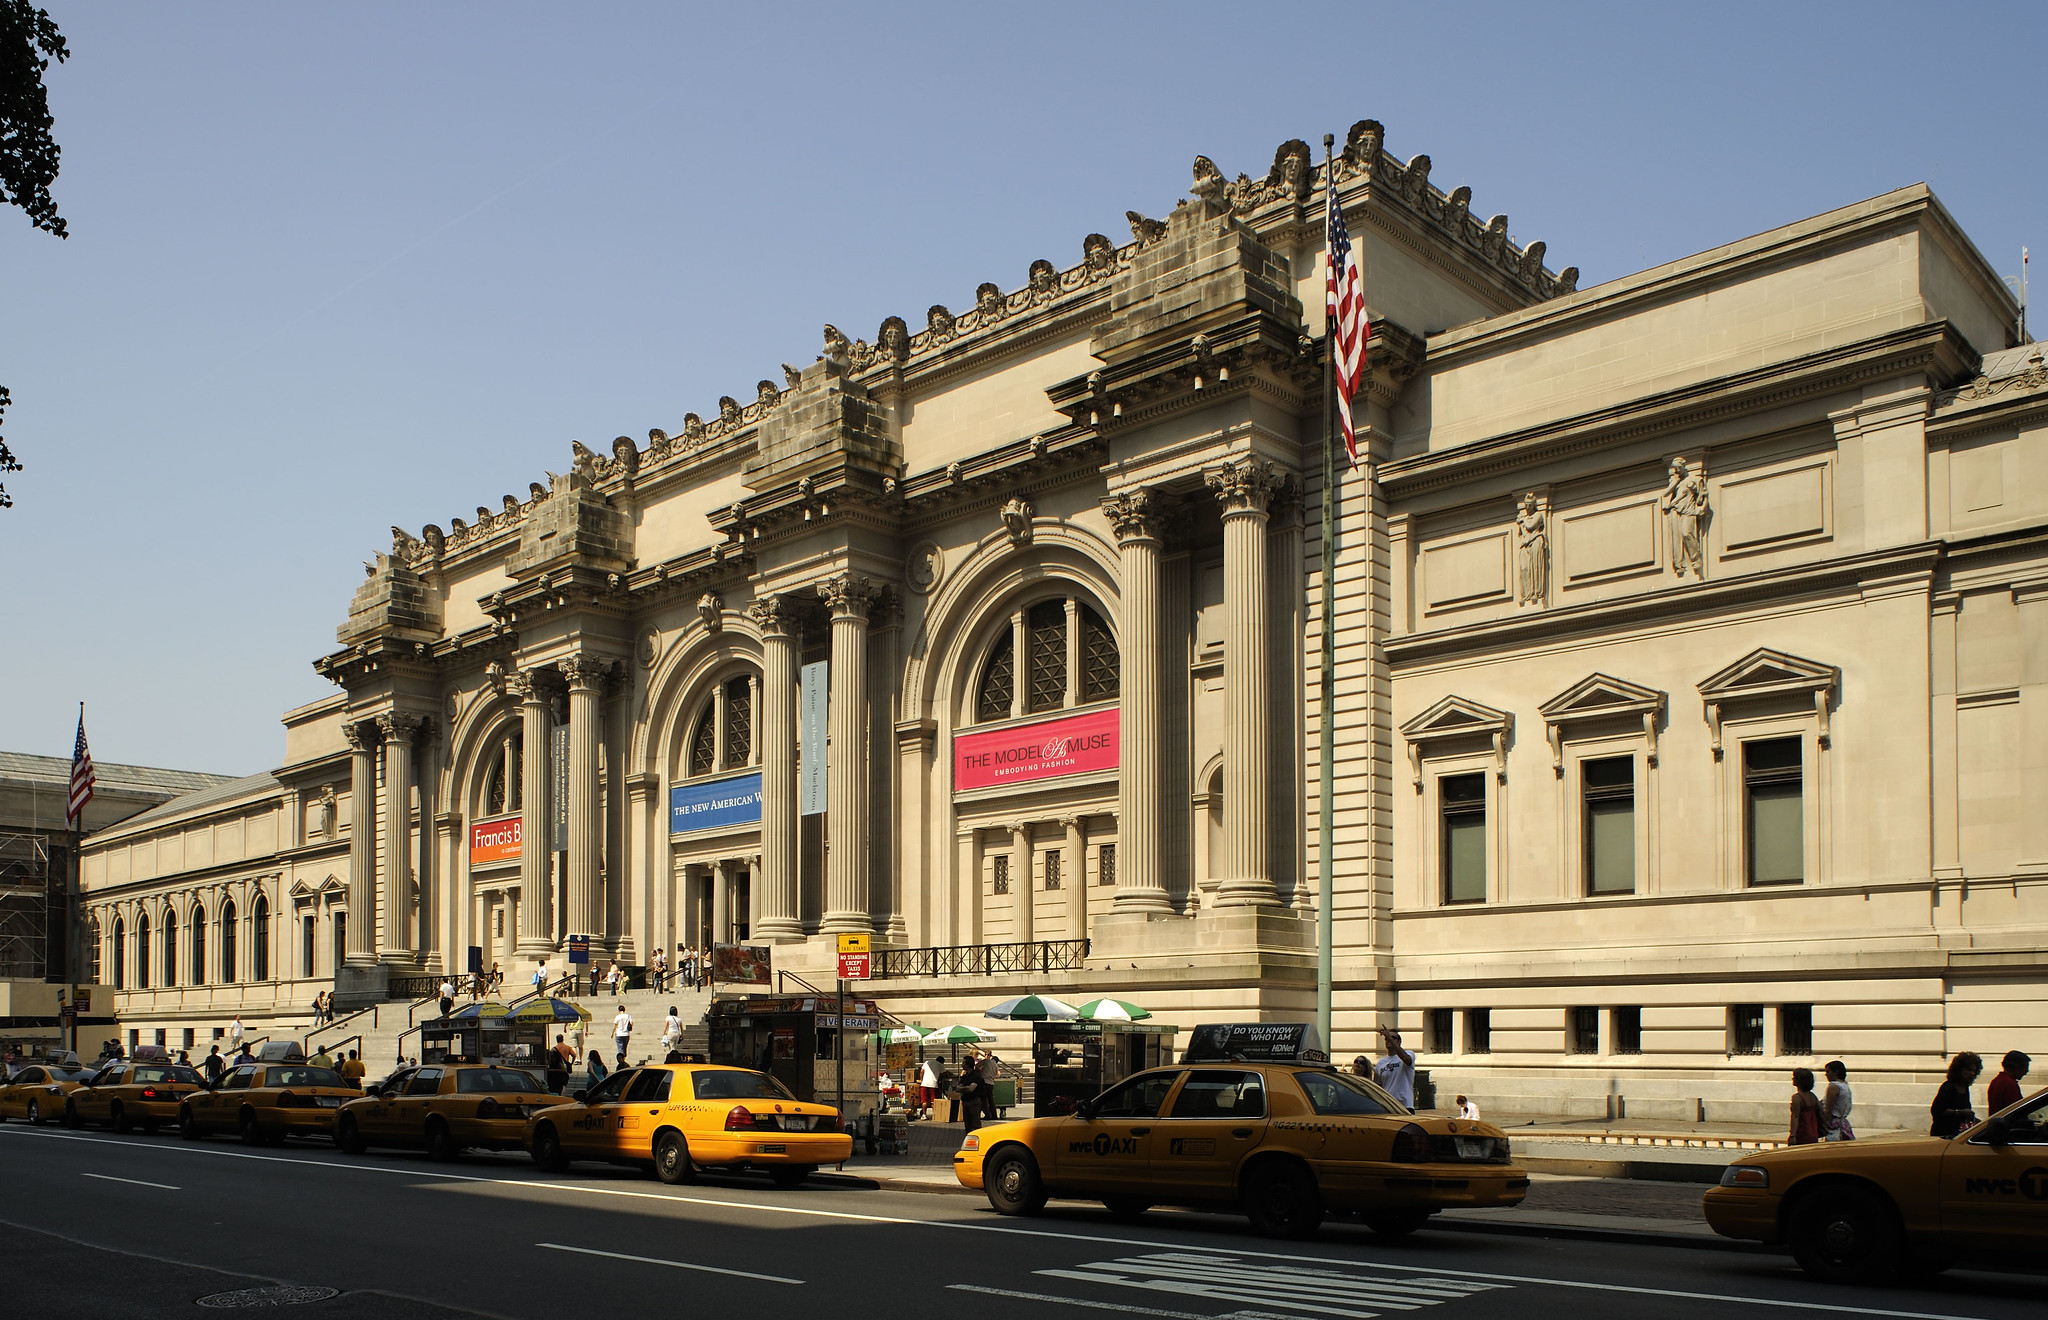 <p>The Metropolitan Museum of Art—also known as The Met—is a large museum that is part of a museum triad forming one of the largest collections of artworks in the U.S. It presents over 5000 years of art from around the world.</p><p><strong>Features:</strong> Exhibitions, events, food & drink, and more.</p><p>Penn State University ,Flickr</p>